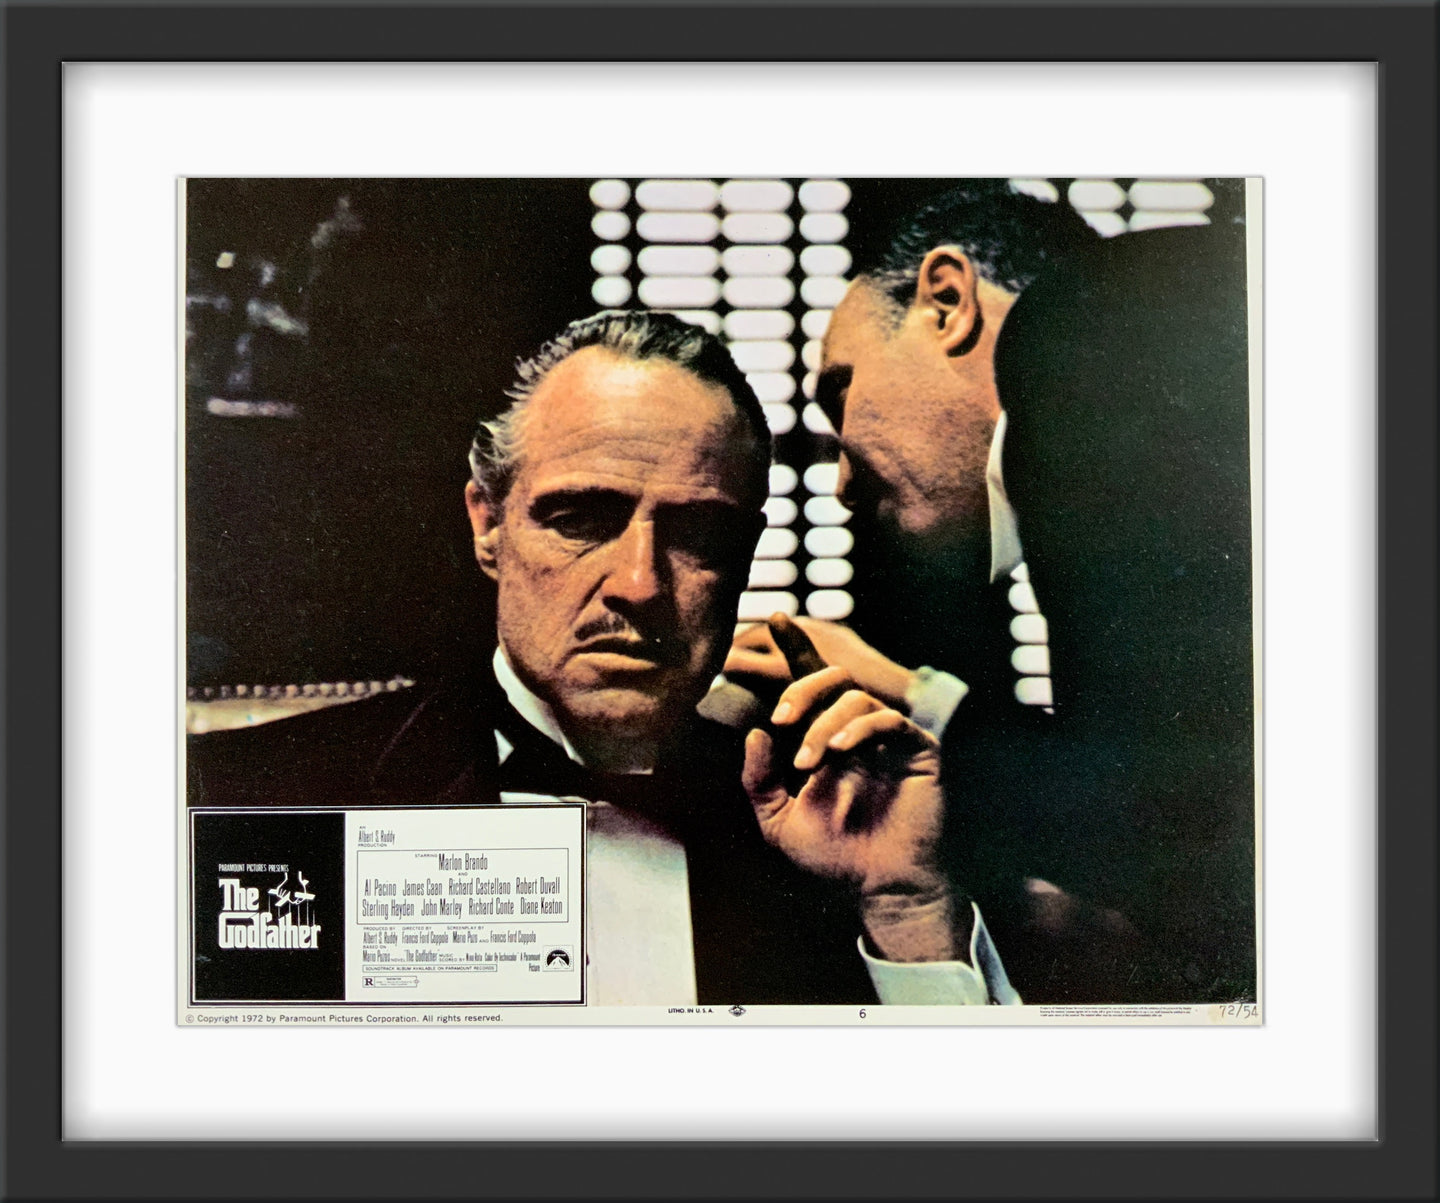 An original lobby card for the film The Godfather